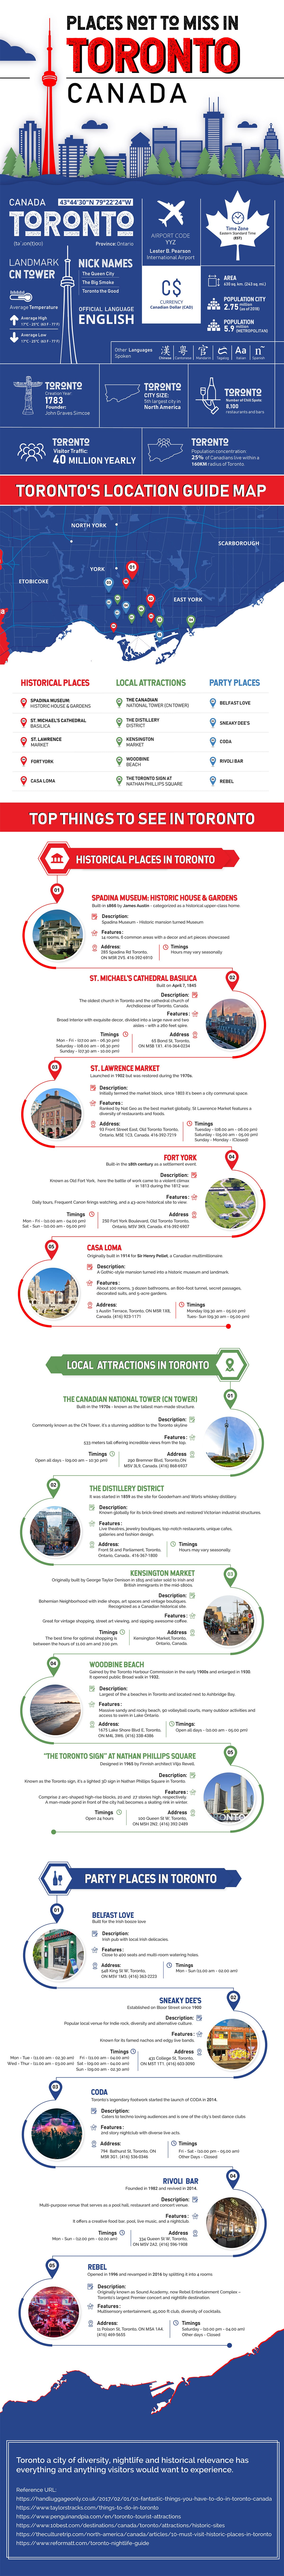 Places Not to Miss in Toronto Canada – Infographic